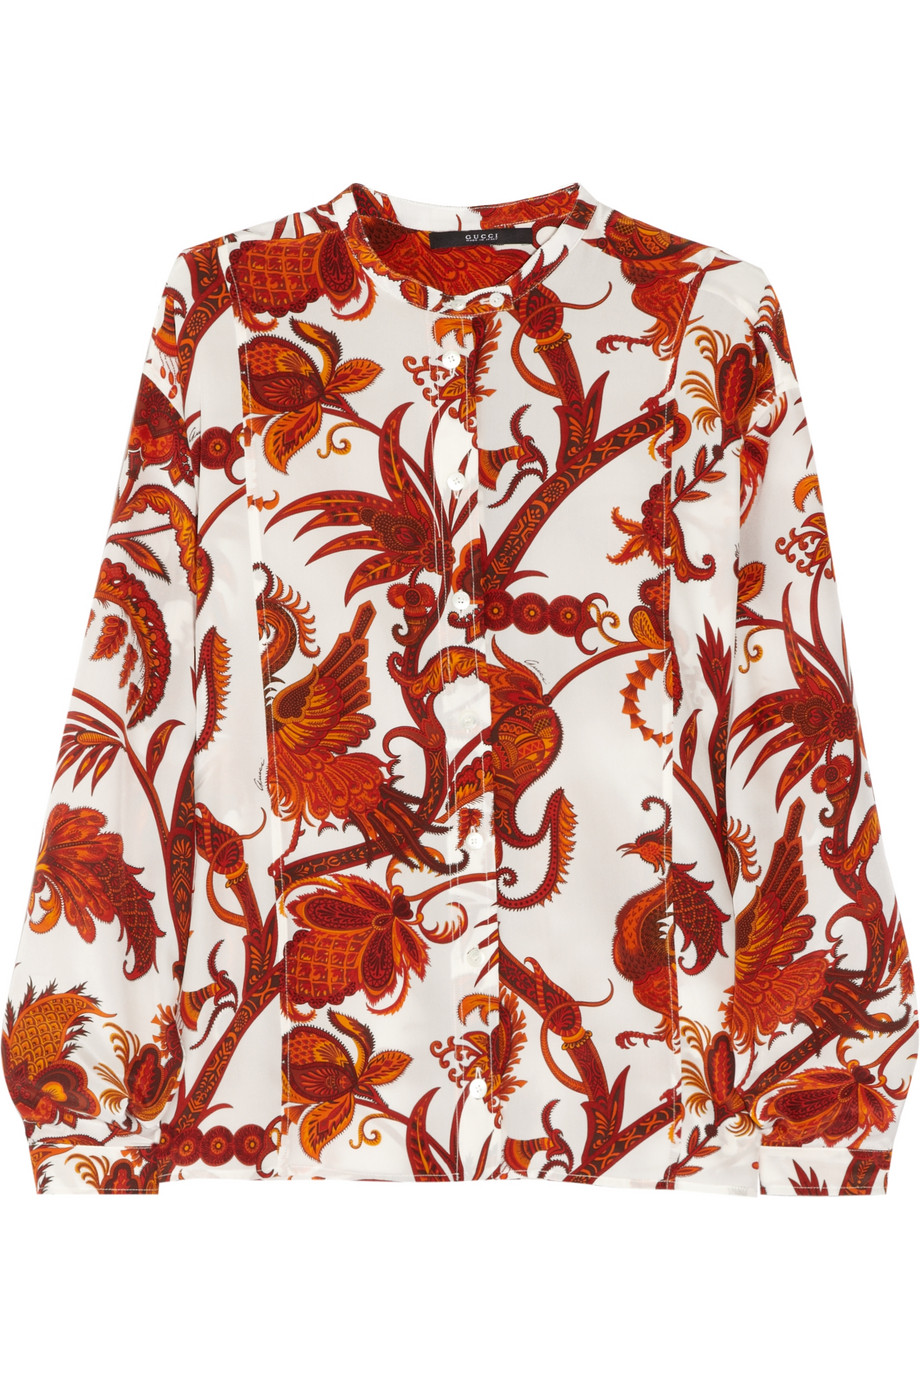 Lyst - Gucci Printed Silk Crepe De Chine Blouse in Red